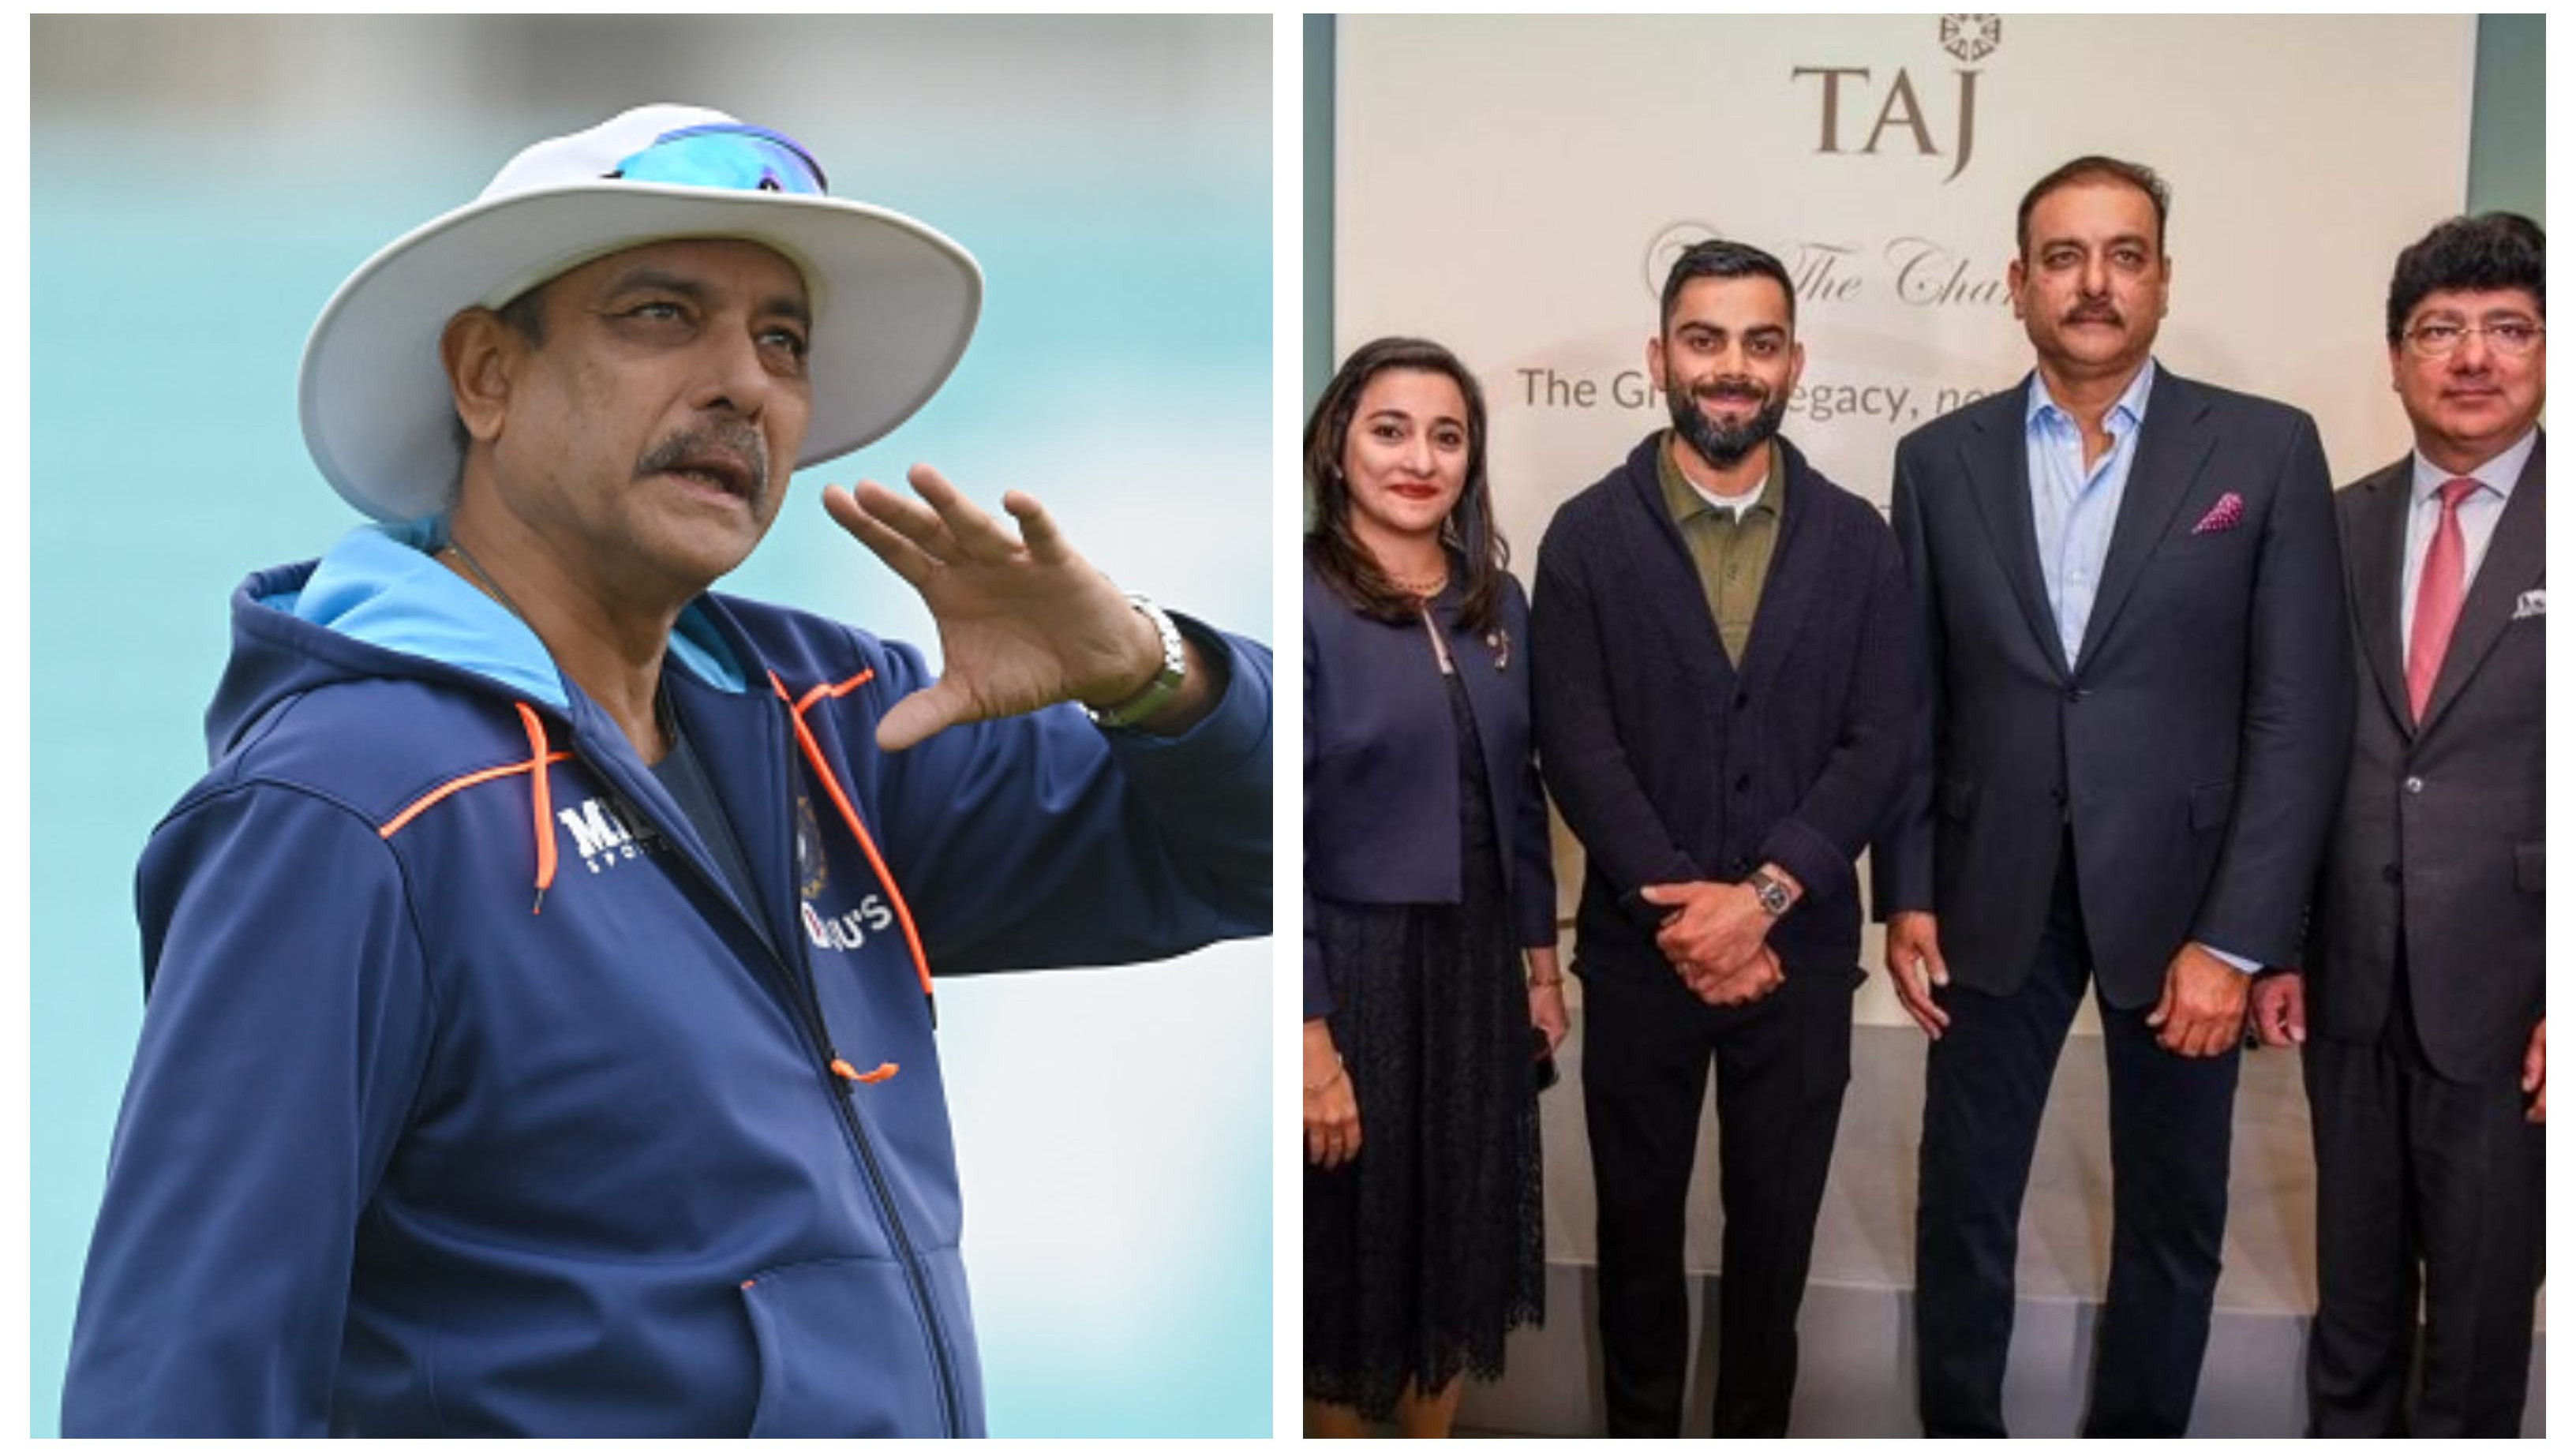 “No one got COVID from that party”, Ravi Shastri says he has no regrets on book launch